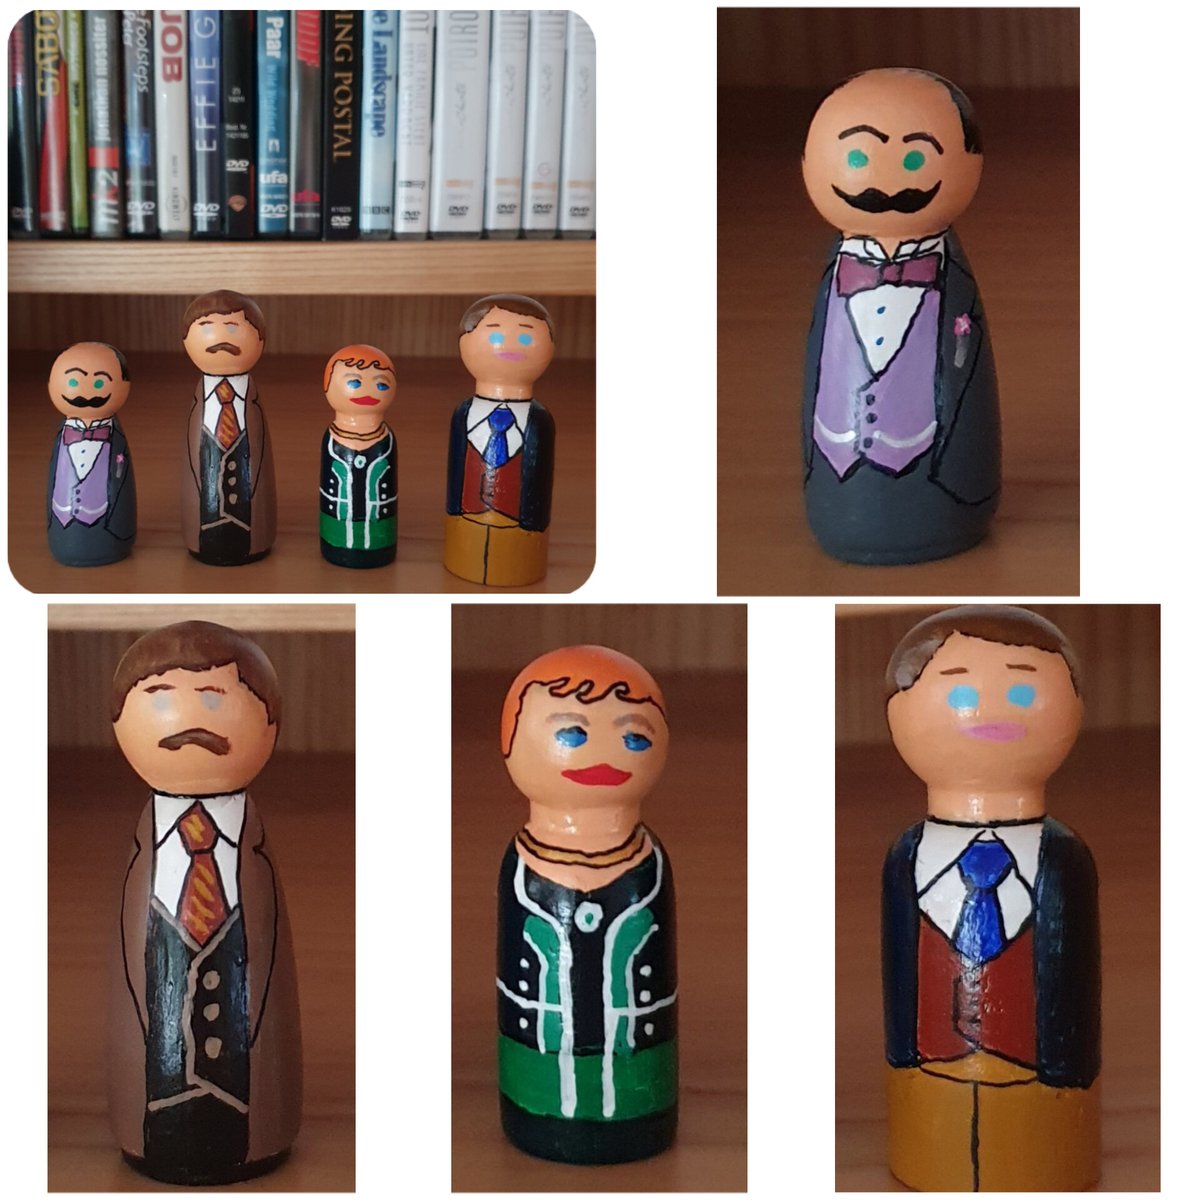 This 'Poirot Gang' is incredibly cute and absolutely magnificently designed. Real little works of art, aren't they Sir David? 😍
#AgathaChristie #HerculePoirot @David_Suchet #AriadneOliver @ZoeWanamaker #InspectorJapp #PhilipJackson #MissLemon #PaulineMoran #Hastings #HughFraser